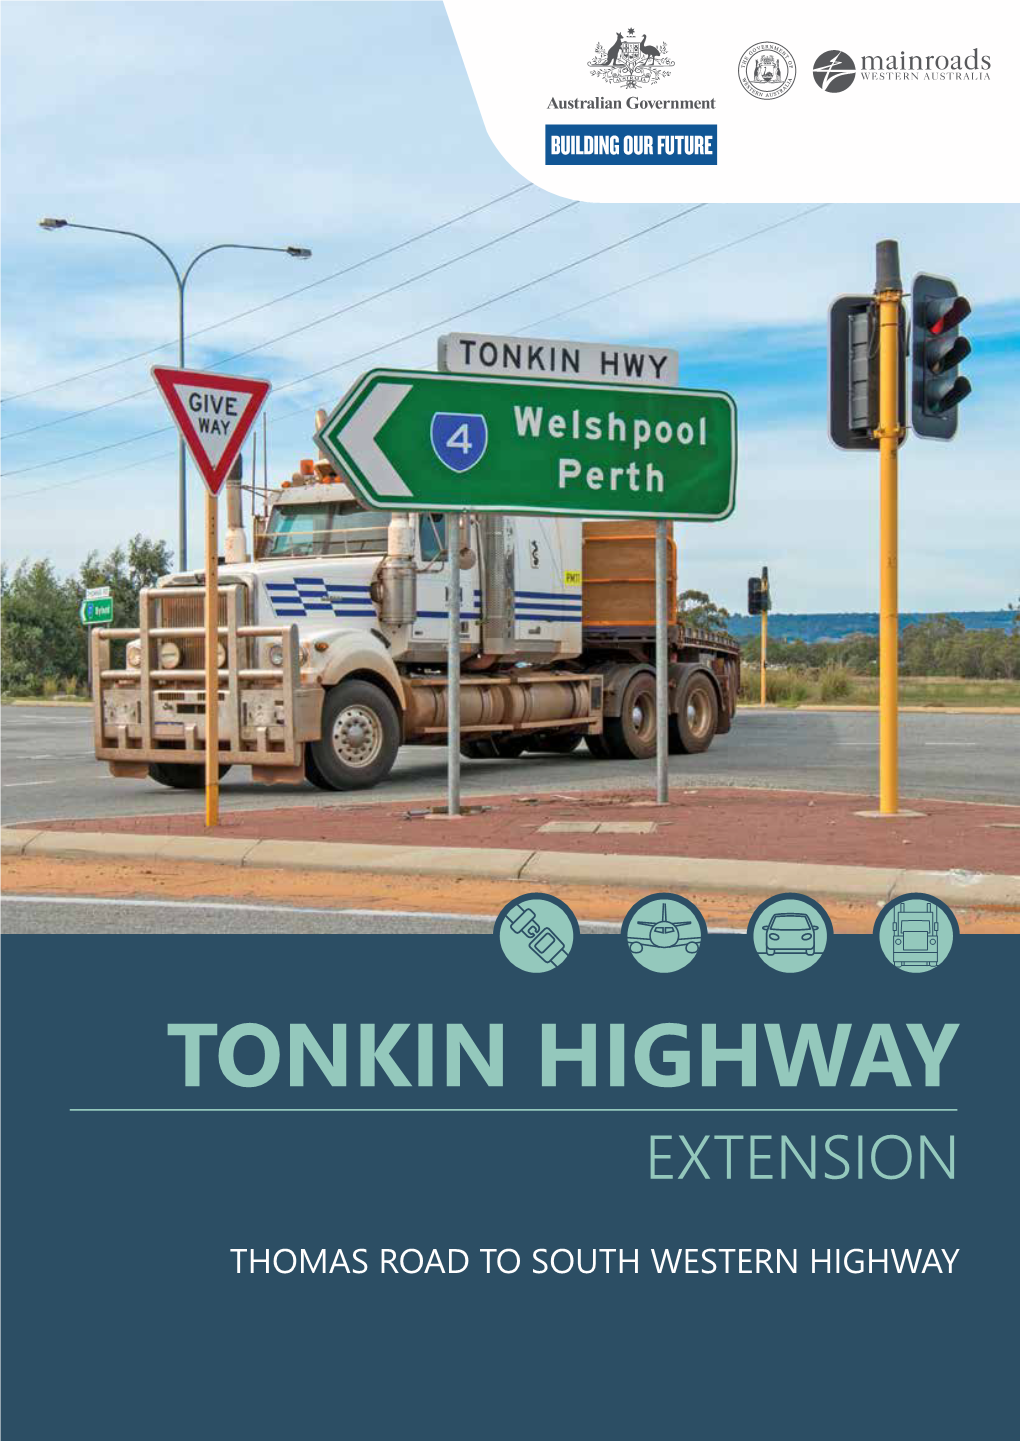 Tonkin Highway Extension - Thomas Road to South Western Highway